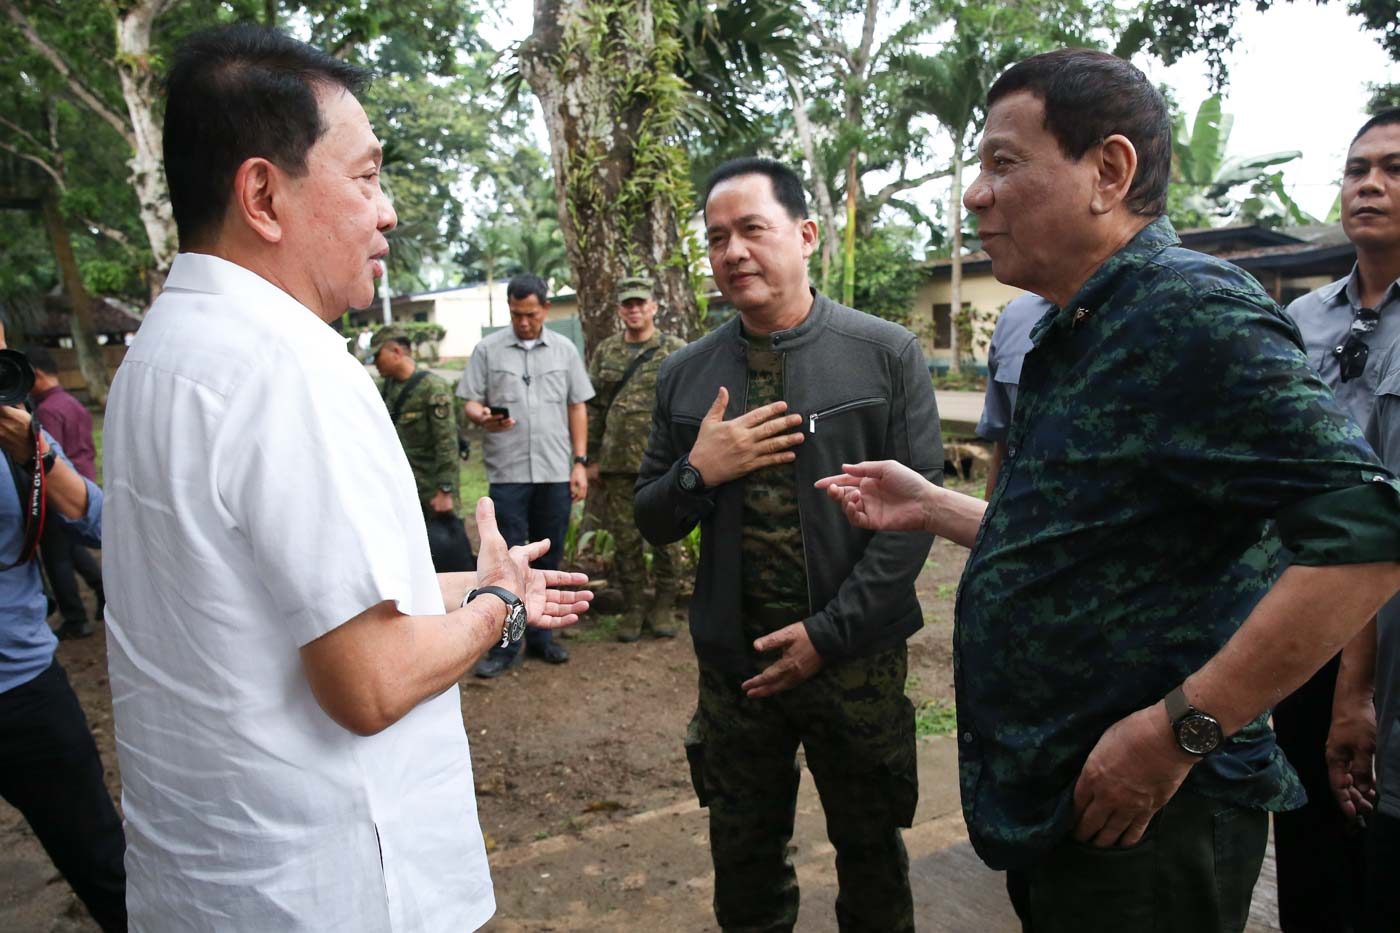 After ‘reunion,’ Pastor Apollo Quiboloy tags along with Duterte in Sulu trip